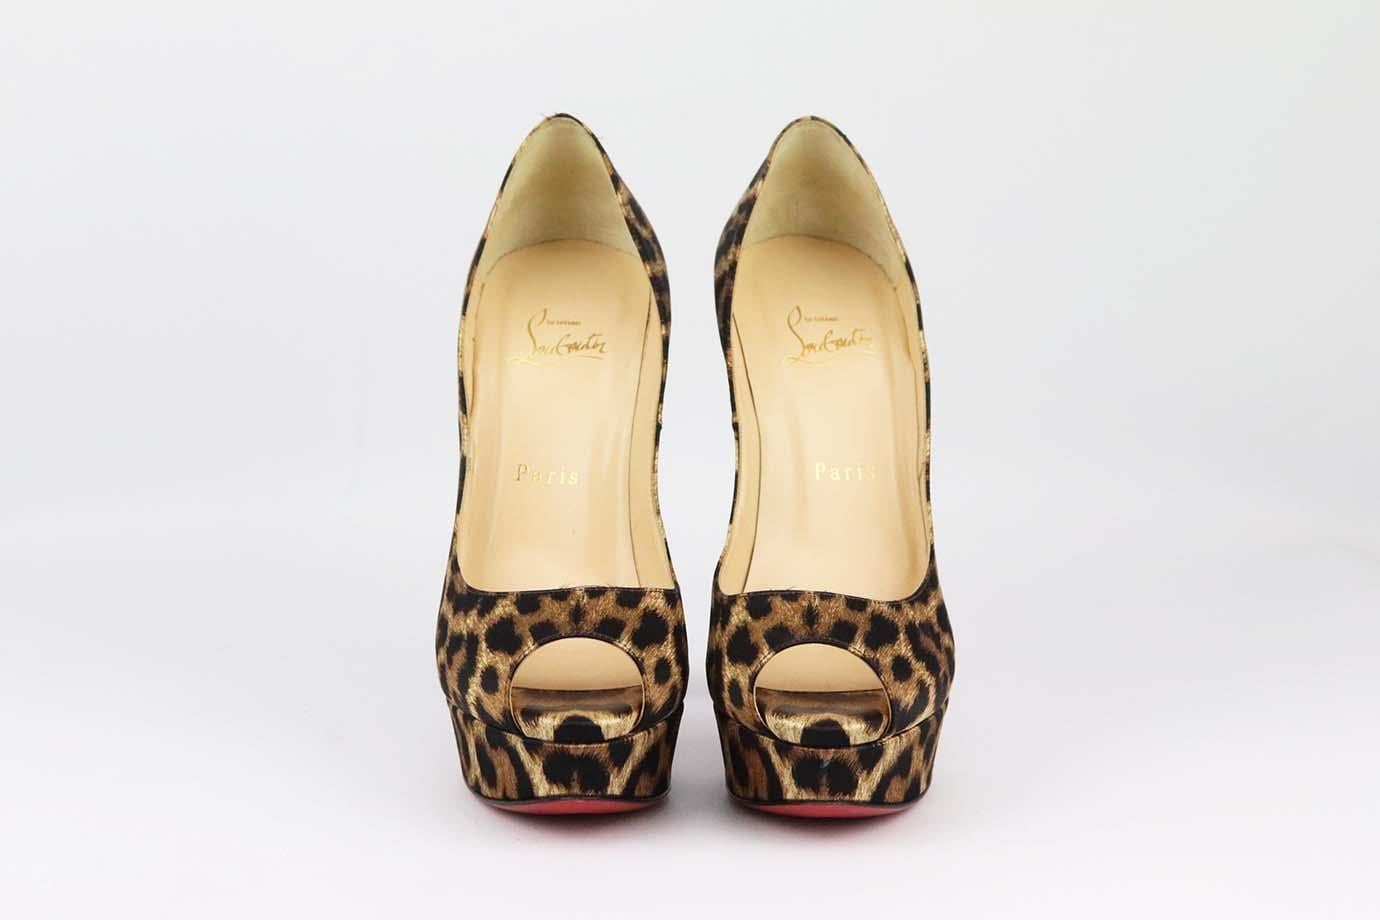 These pumps by Christian Louboutin have been made in Italy from brown and black leopard-print satin, they're set on a towering 115mm stiletto heel that's balanced by a concealed platform and have a peep-toe silhouette and signature red soles. Heel